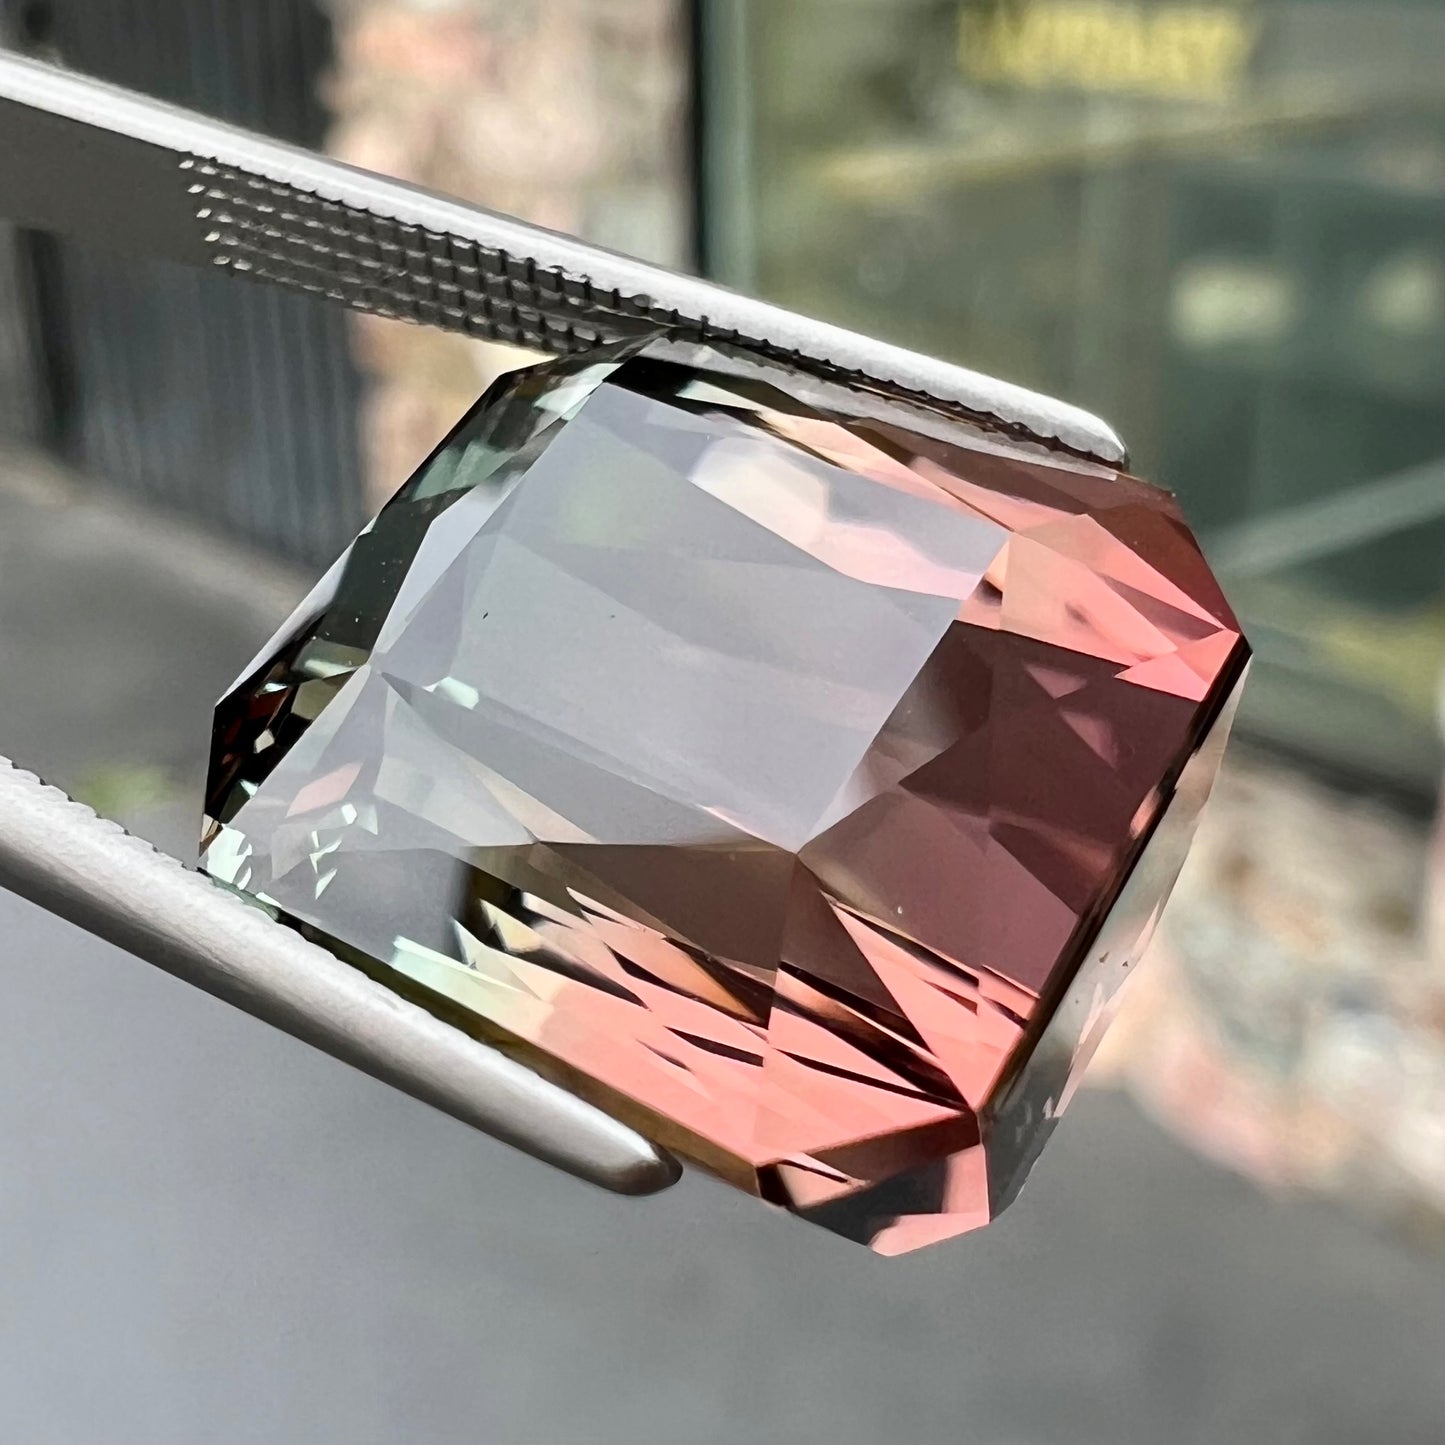 A loose, faceted modified emerald cut bicolor tourmaline gemstone.  The stone transitions from dark pink to dark green colors.